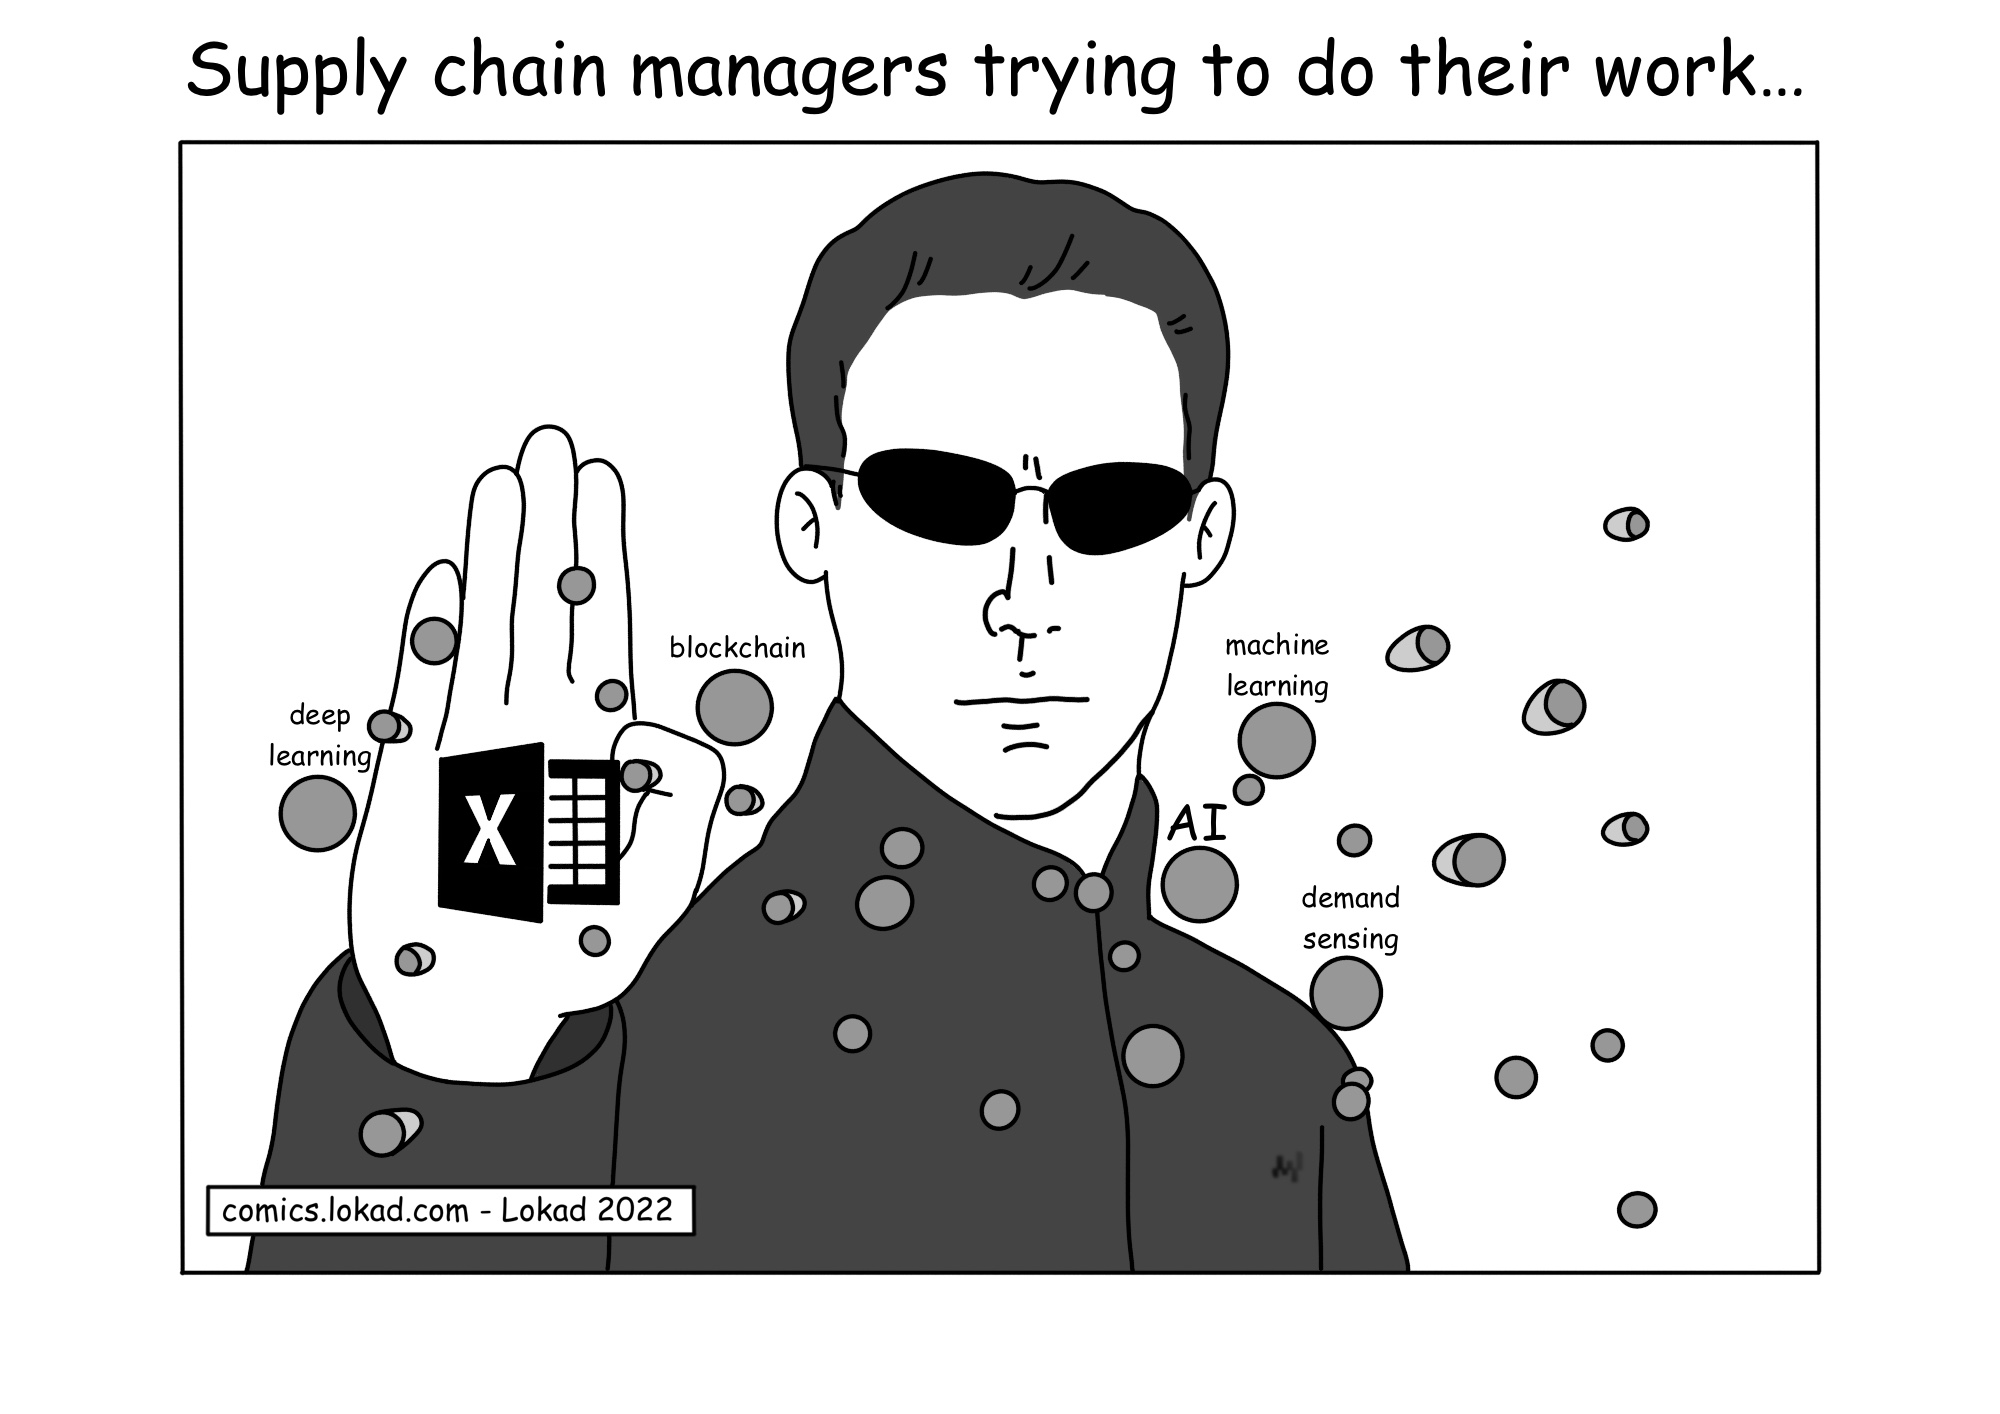 Supply chain managers trying to do their work...